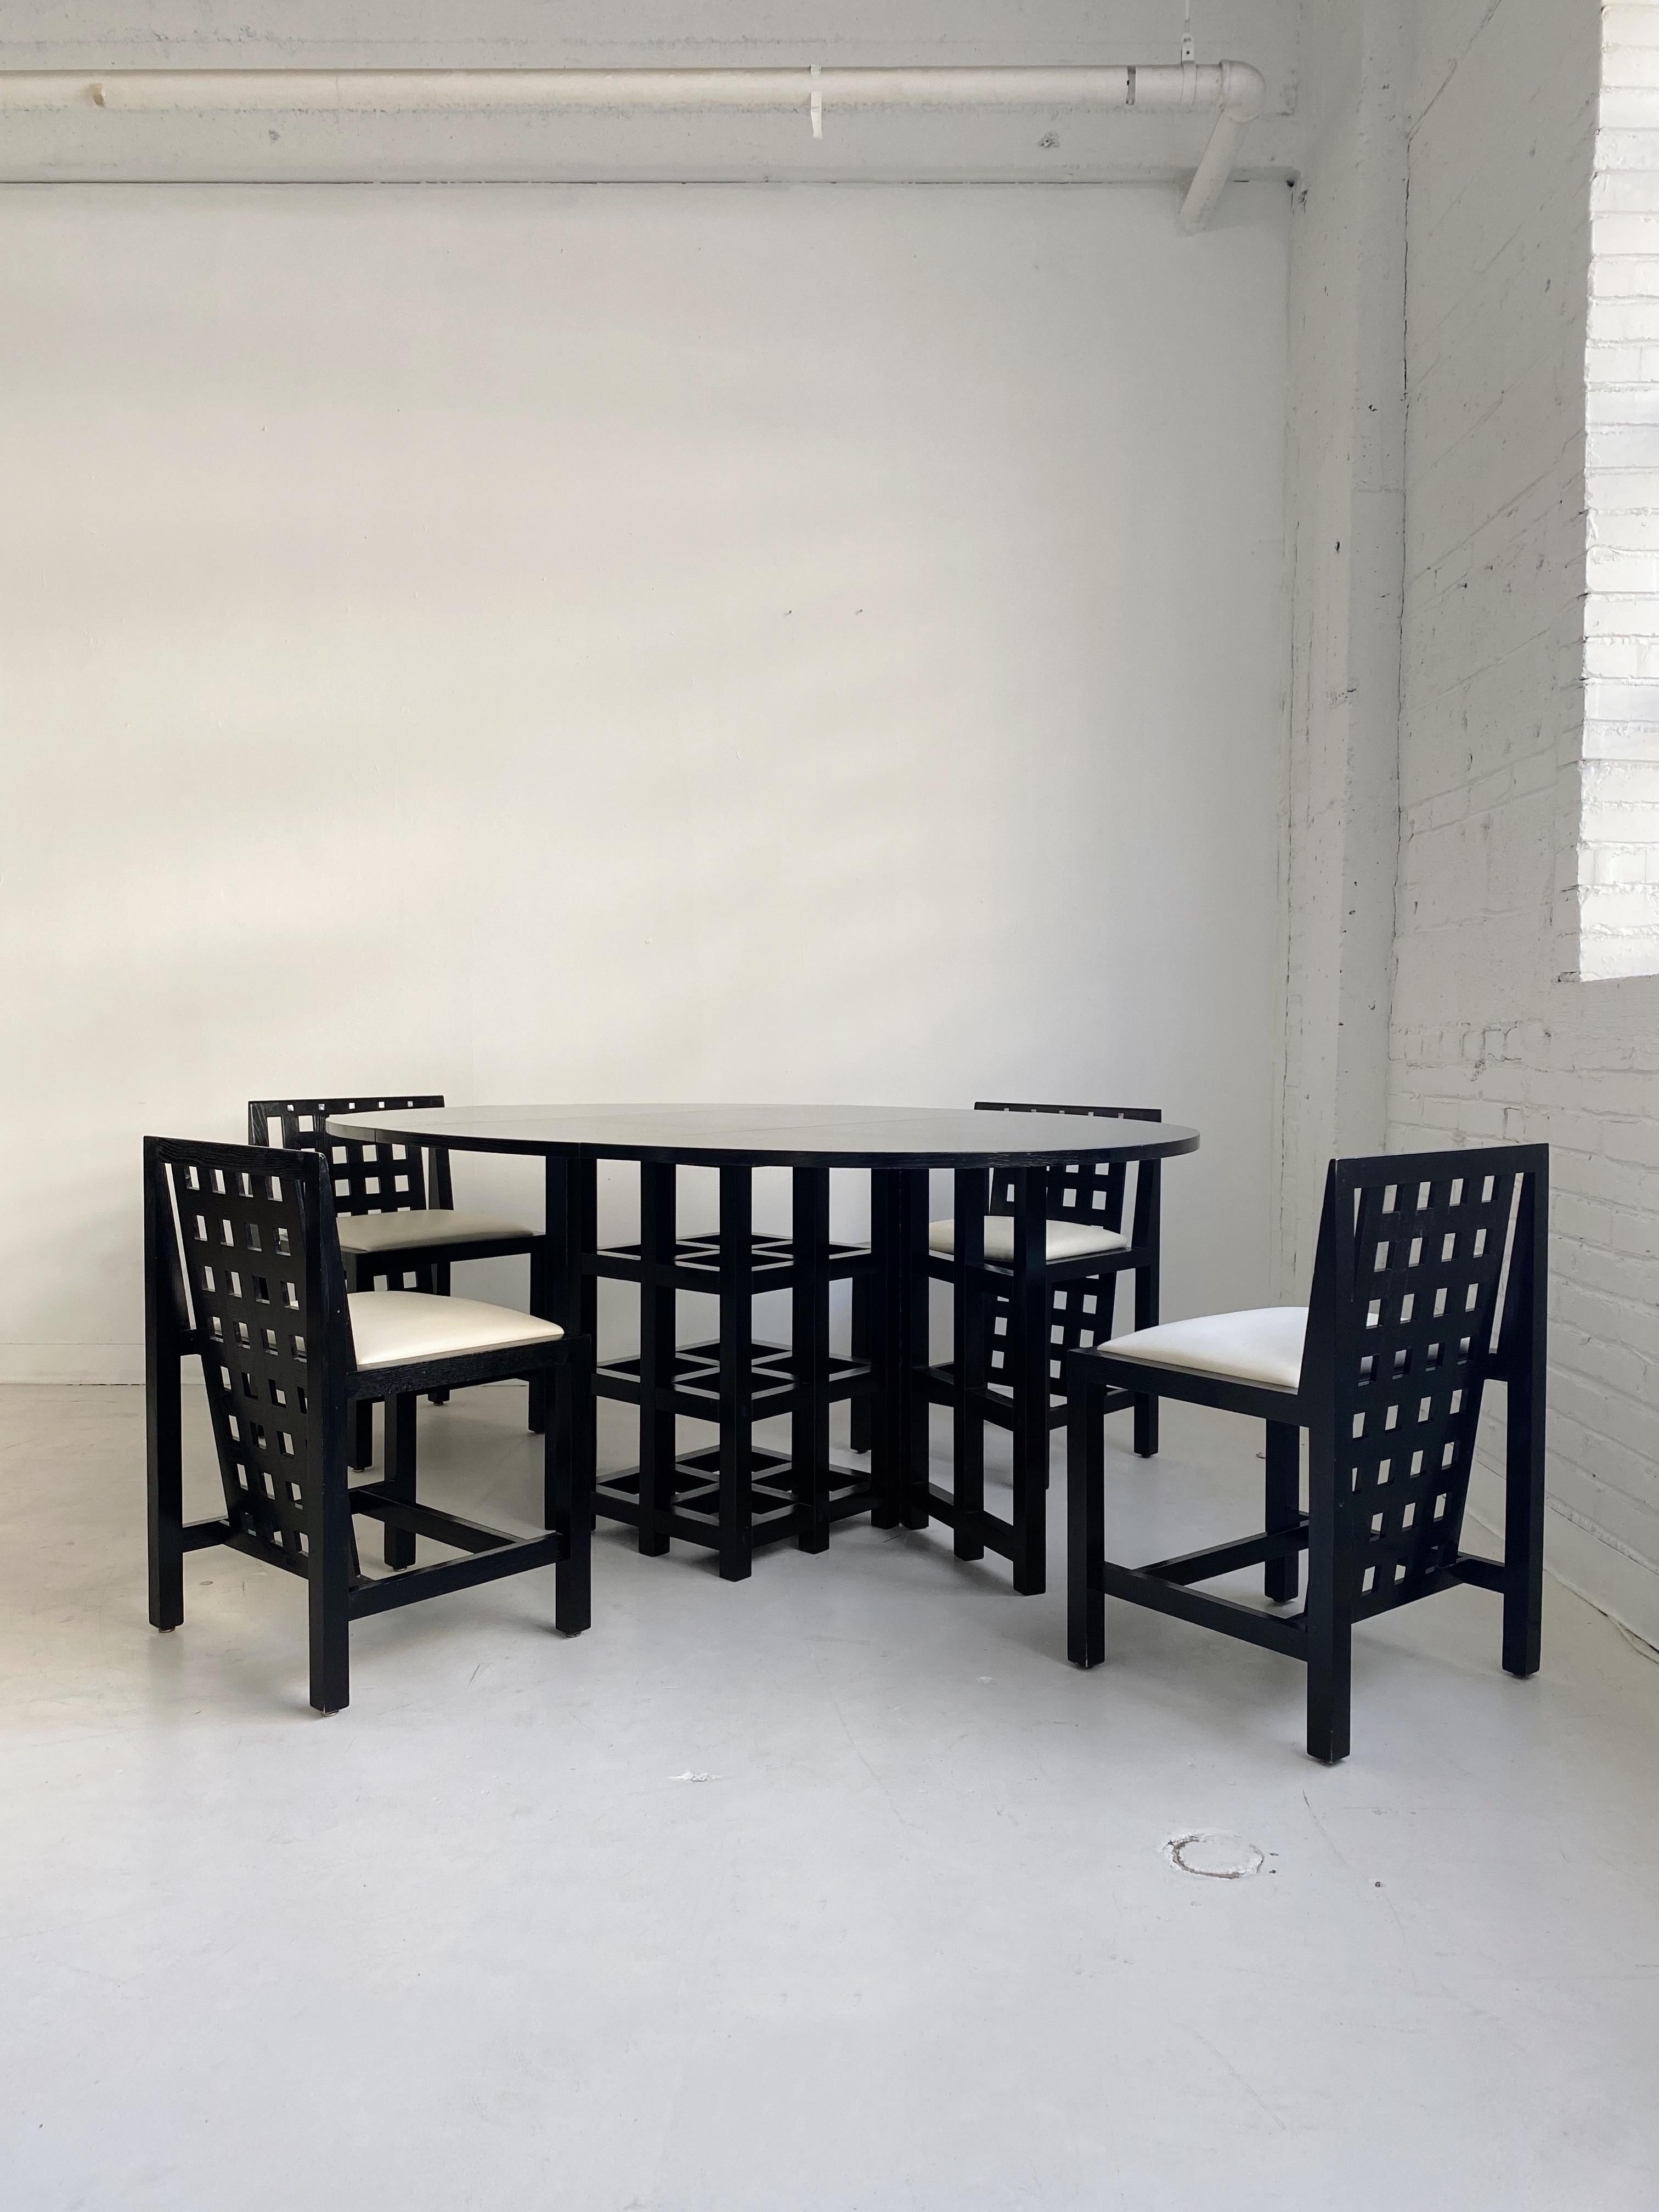 DS1 oval drop leaf dining table & 4 ds3 dining chairs by Charles Rennie Mackintosh for Cassina, 70's

Ebonized ash drop leaf table, ebonized ash chairs with mother of pearl inlays & white vinyl upholstery

Dimensions:

Table: 22.5”W closed